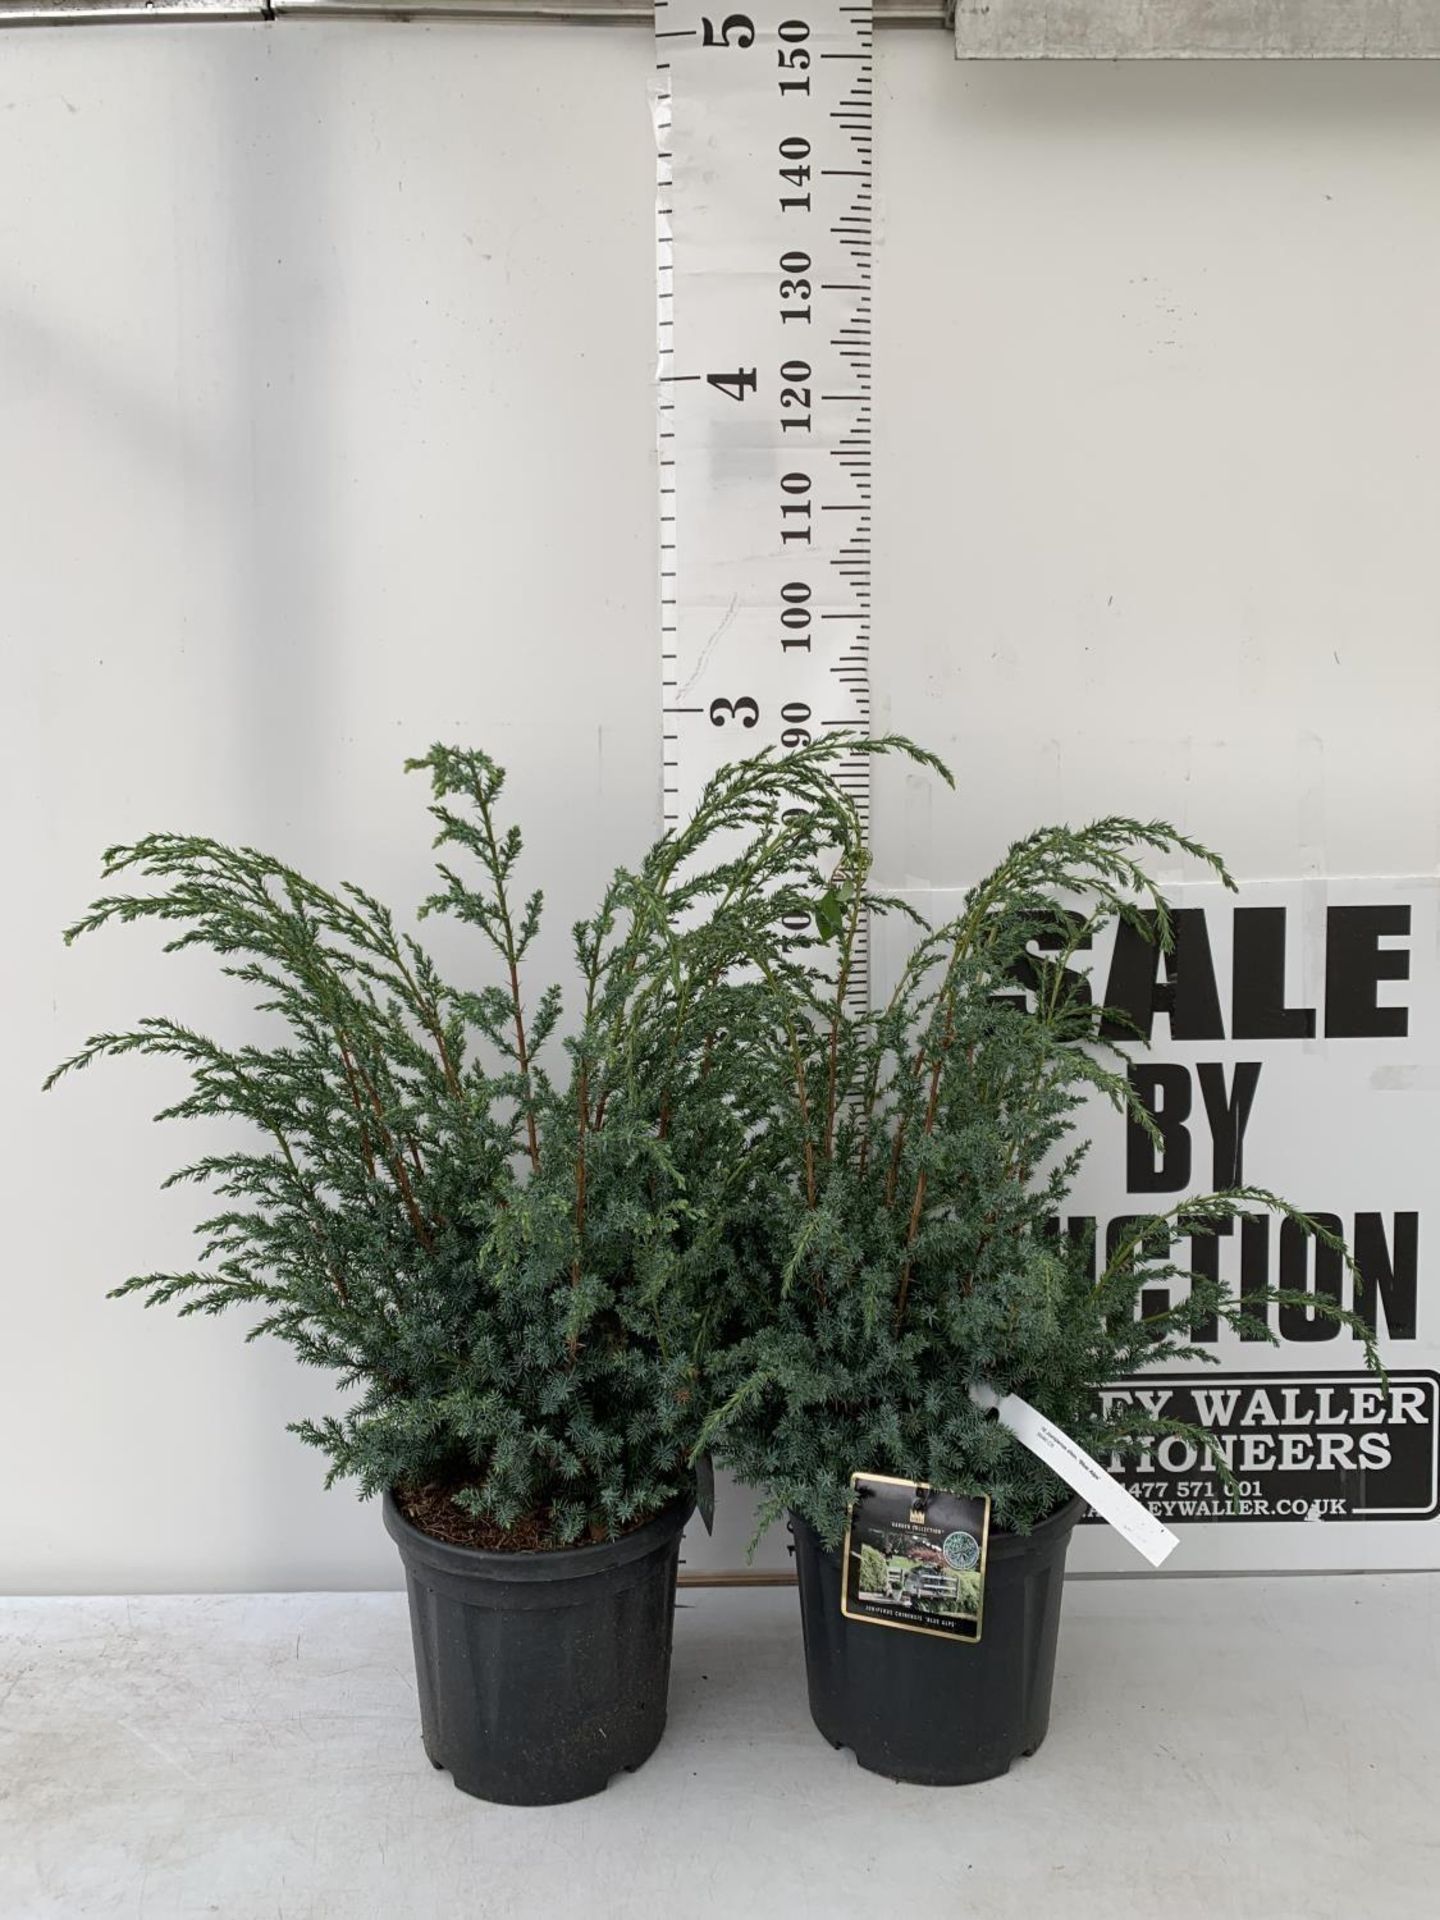 TWO JUNIPERUS CHINENSIS BLUE ALPS IN 7 LTR POTS A METRE IN HEIGHT PLUS VAT TO BE SOLD FOR THE TWO - Image 6 of 22